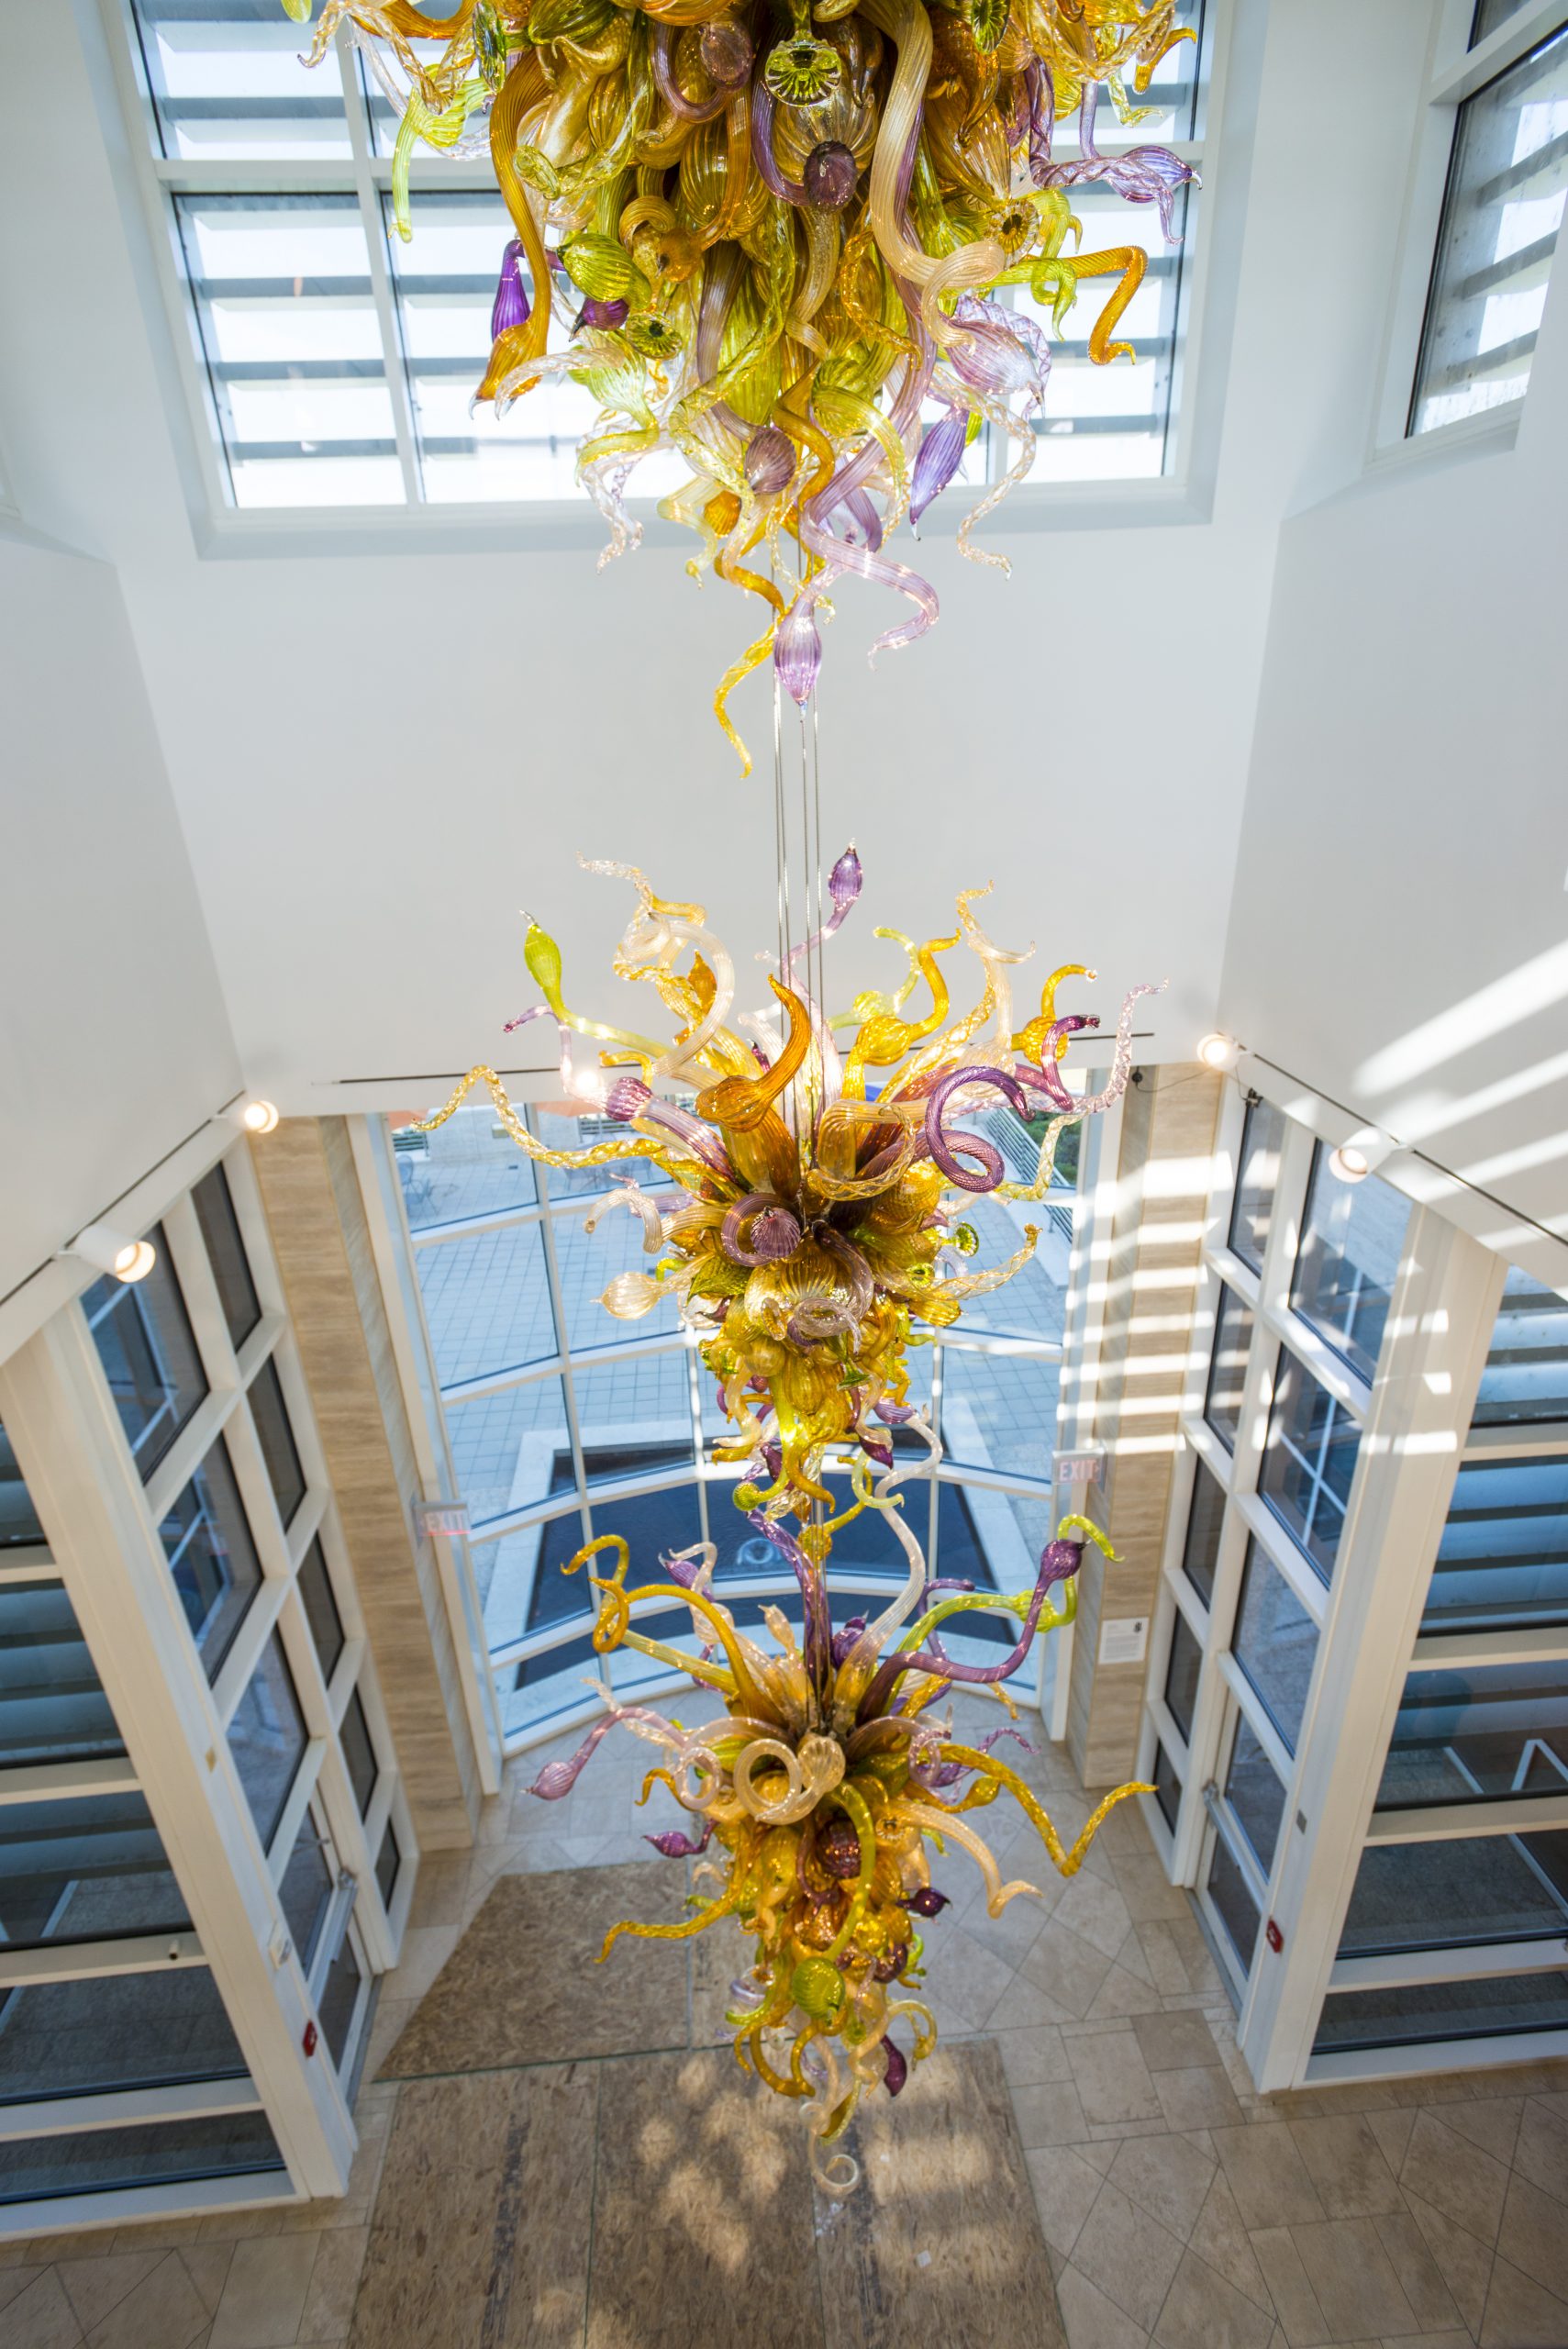 An intricate glass sculpture hangs from the ceiling.